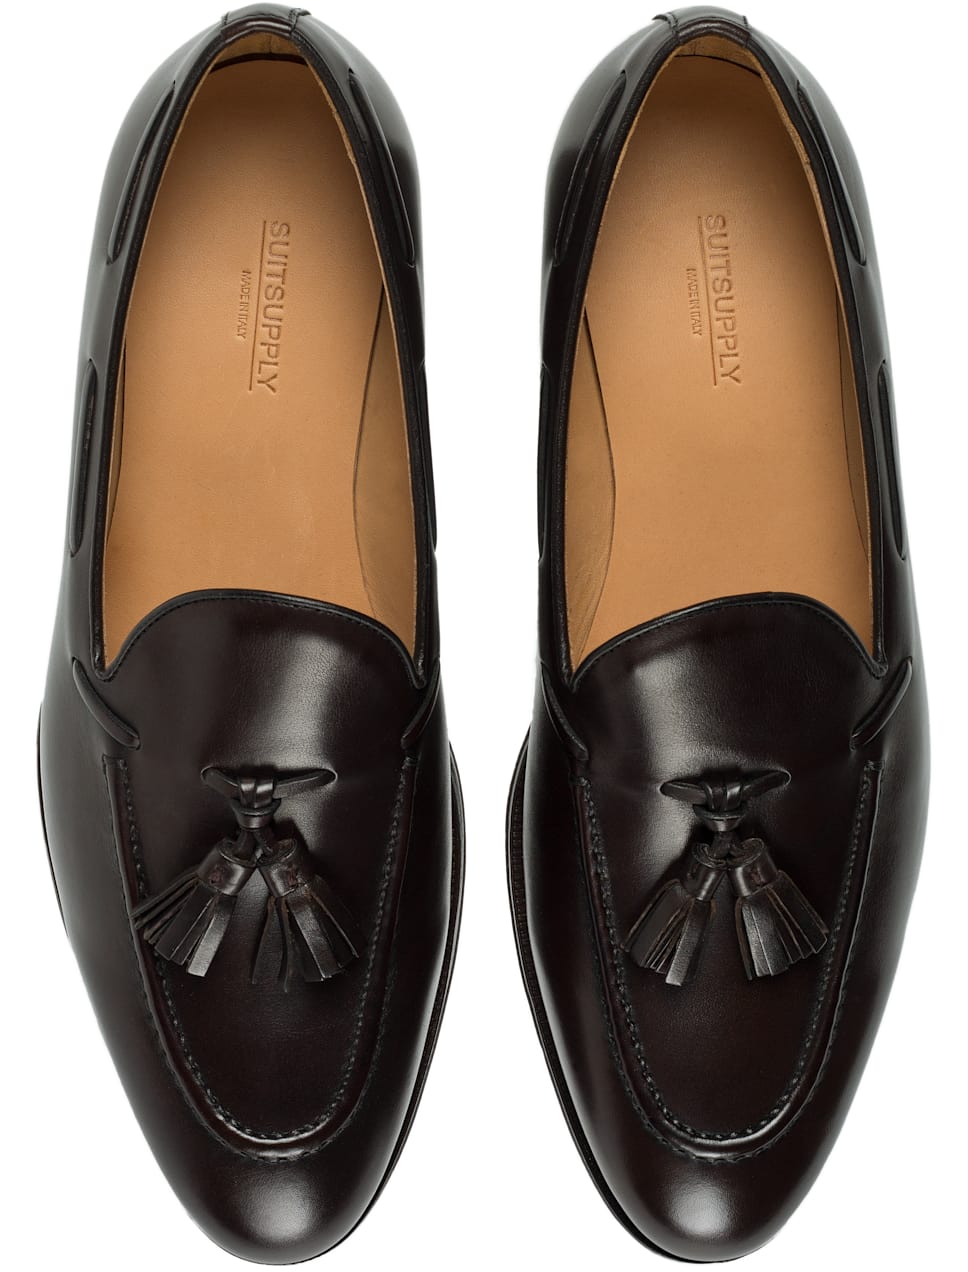 Brown Tassel Loafer Fw1100 | Suitsupply Online Store